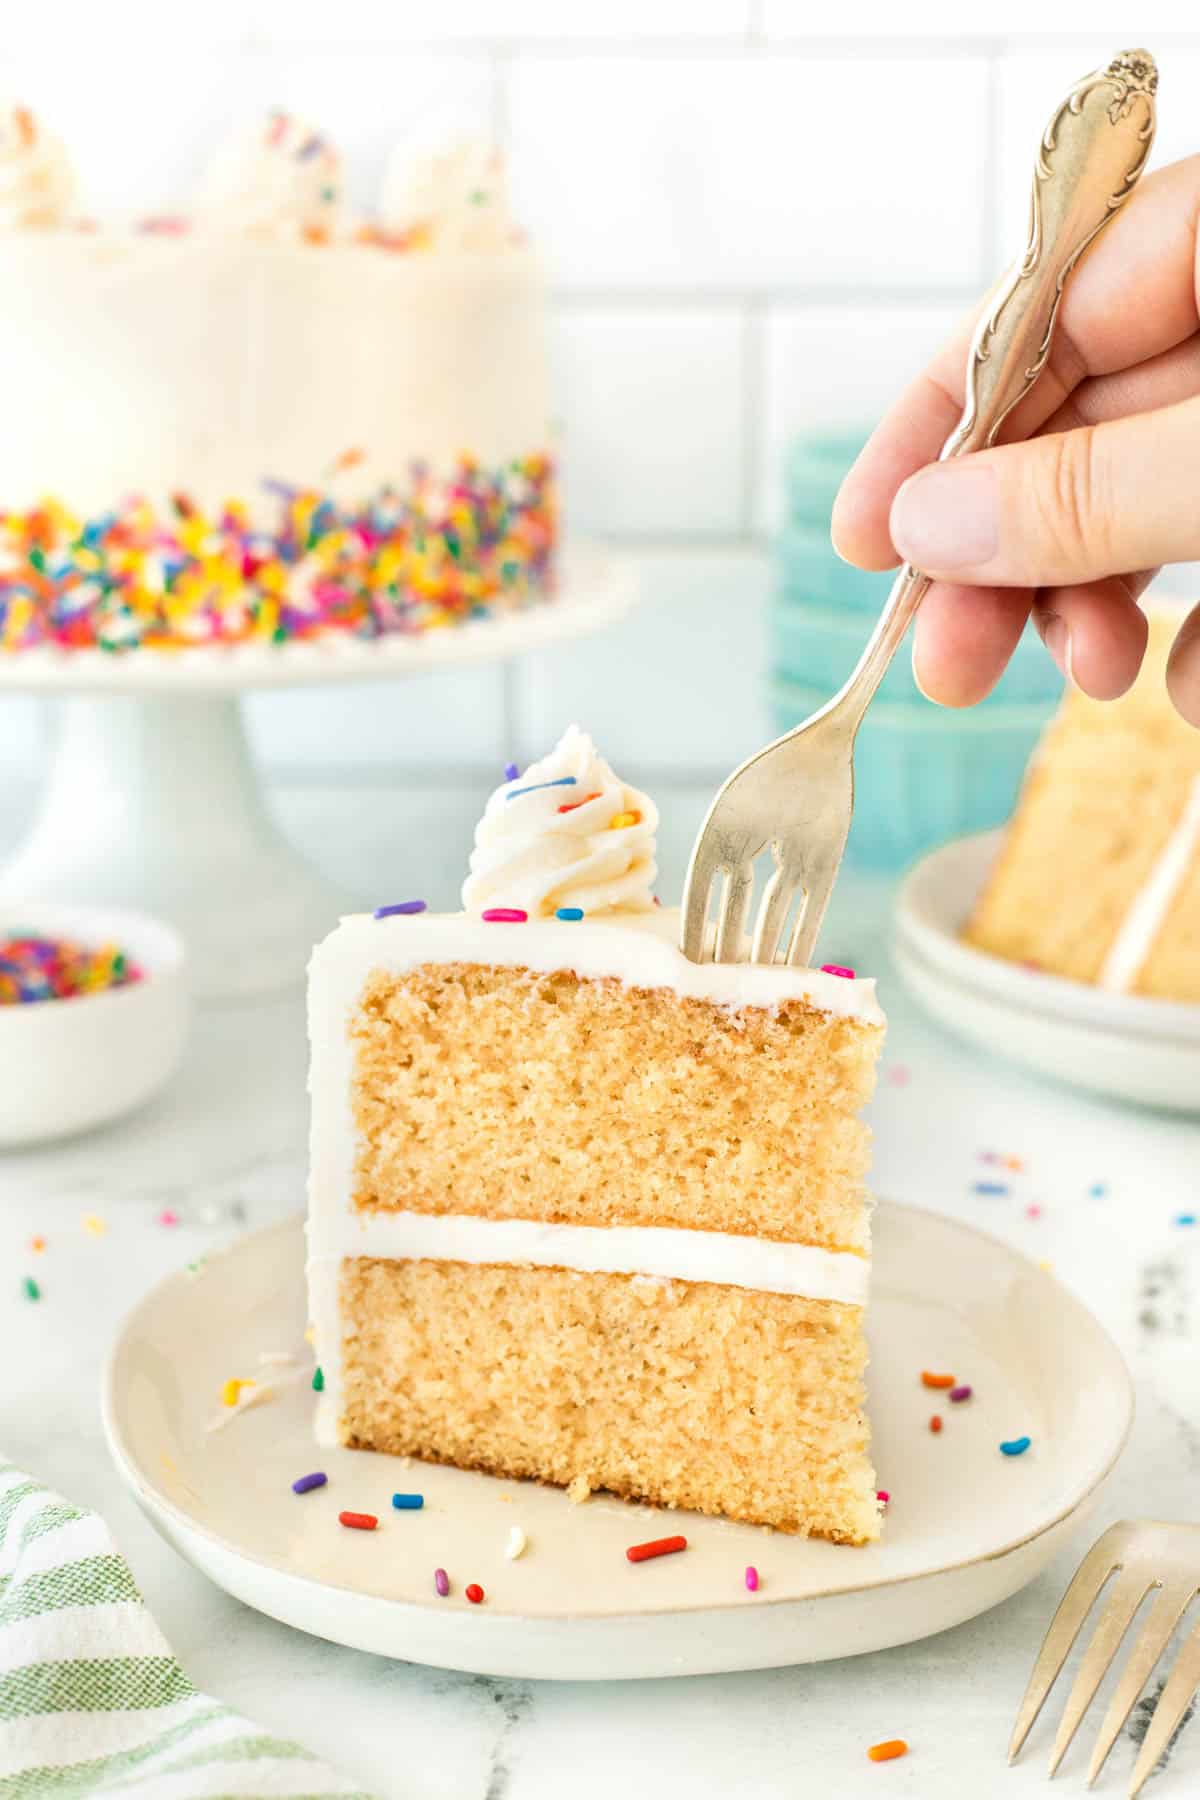 Sticking a fork into a slice of cake. 